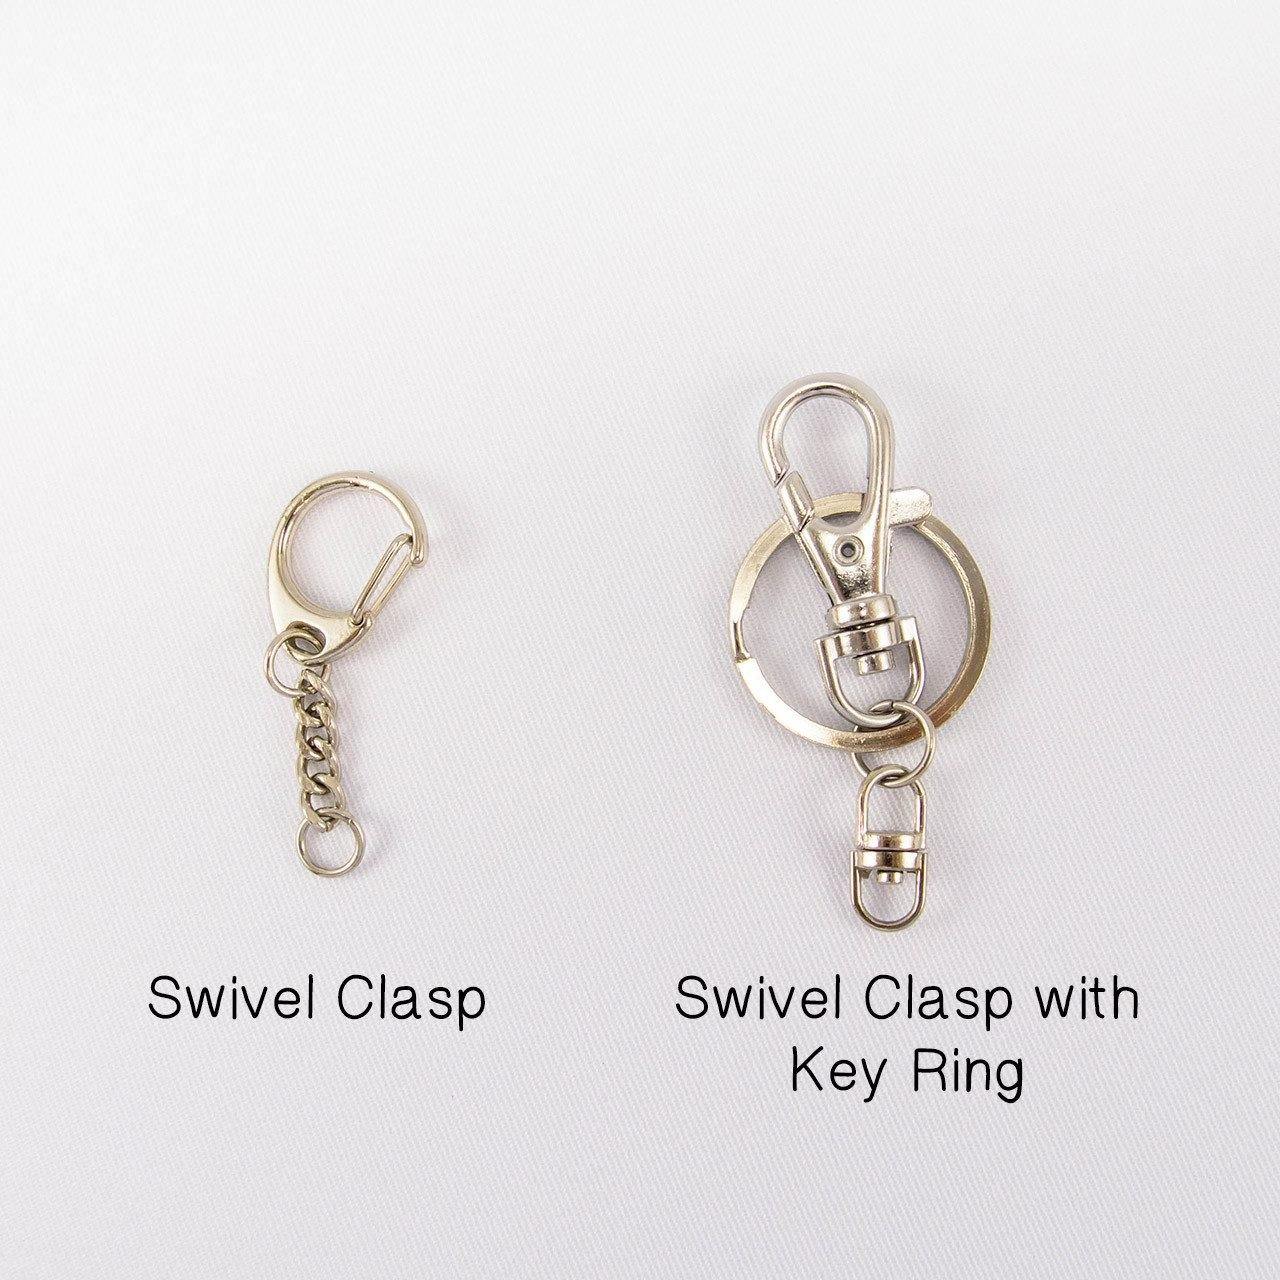 Swivel clasp and key ring options